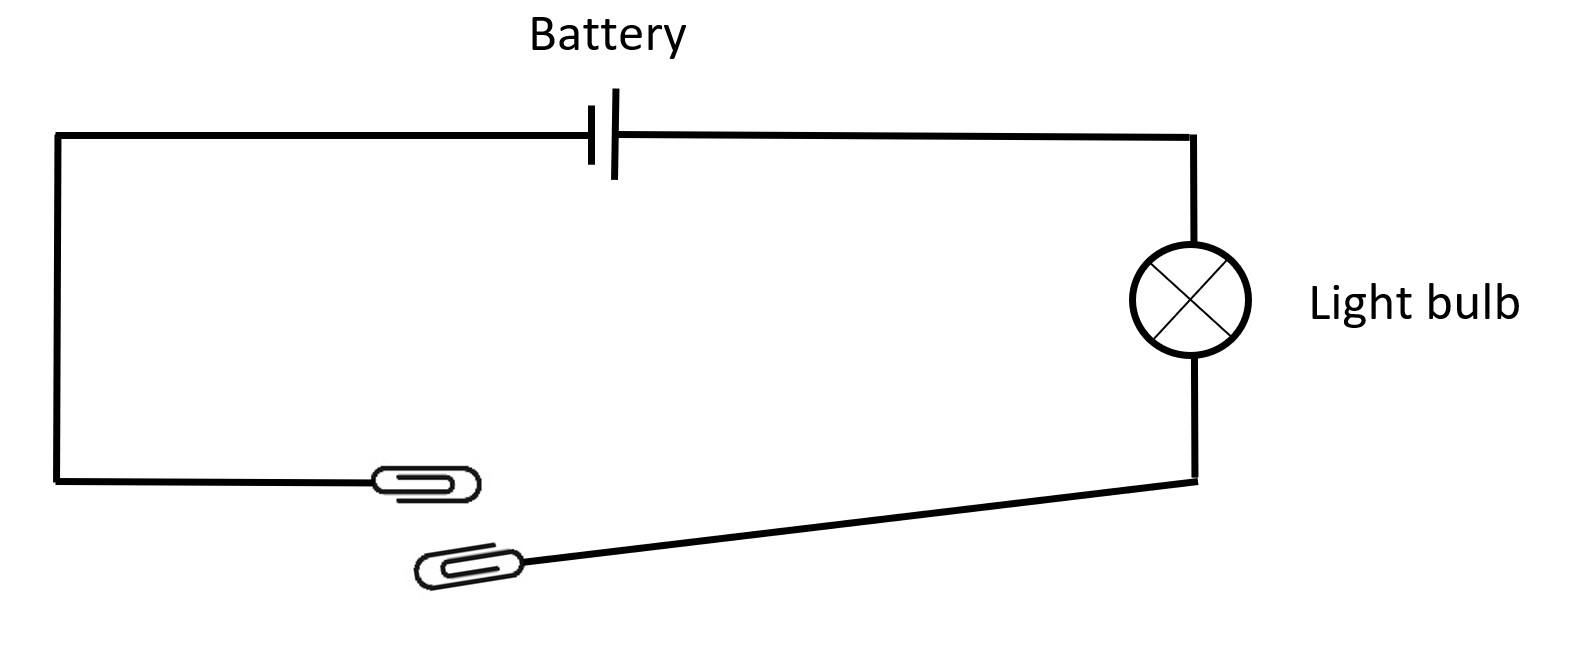 A diagram of a battery and lightbulb electrical circuit